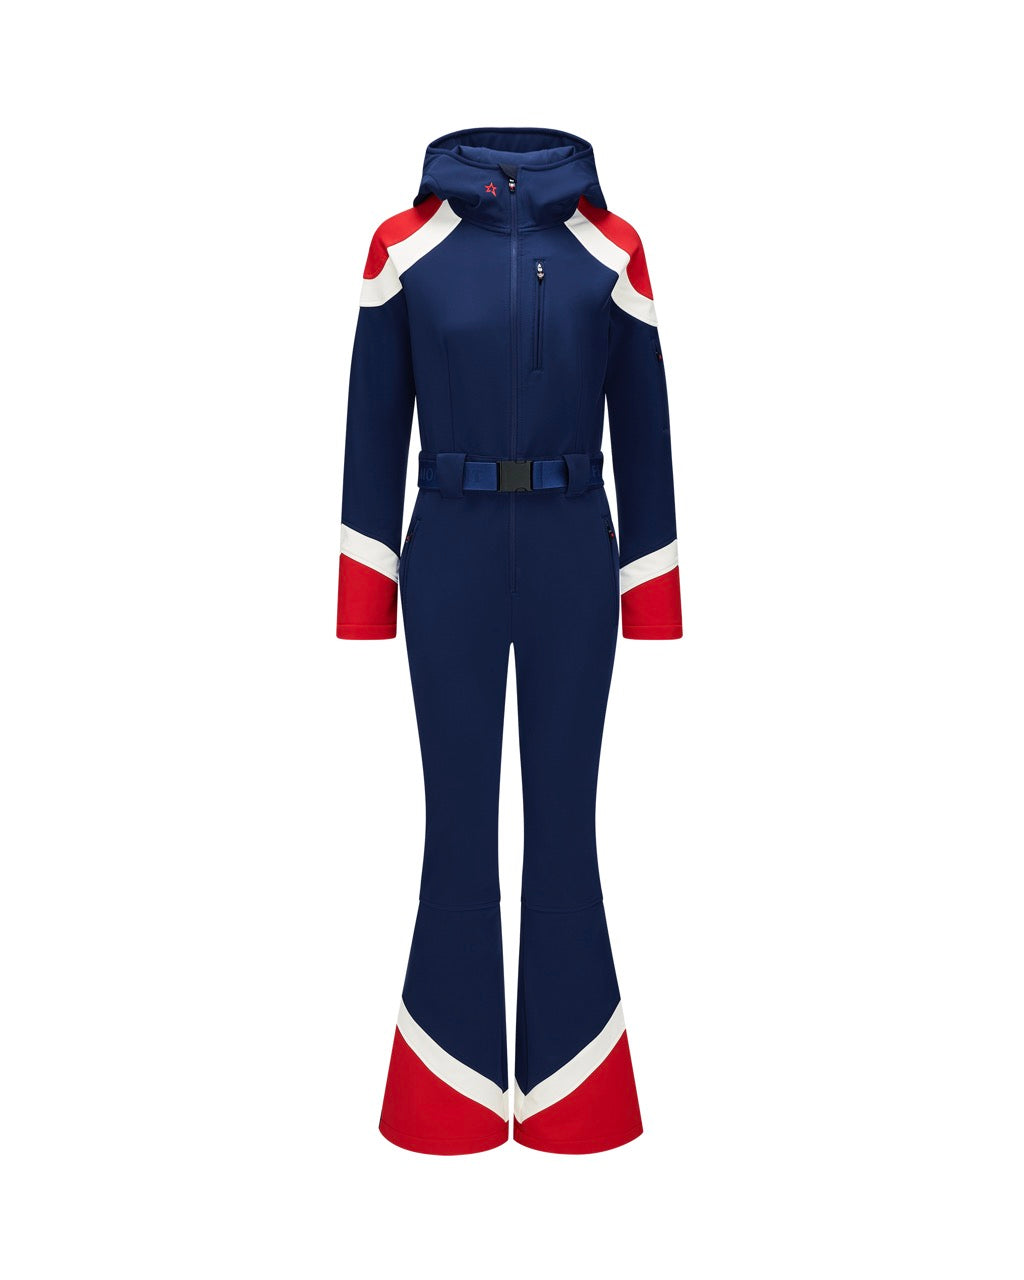 Perfect Moment Women's Allos Ski Suit - Navy & Red